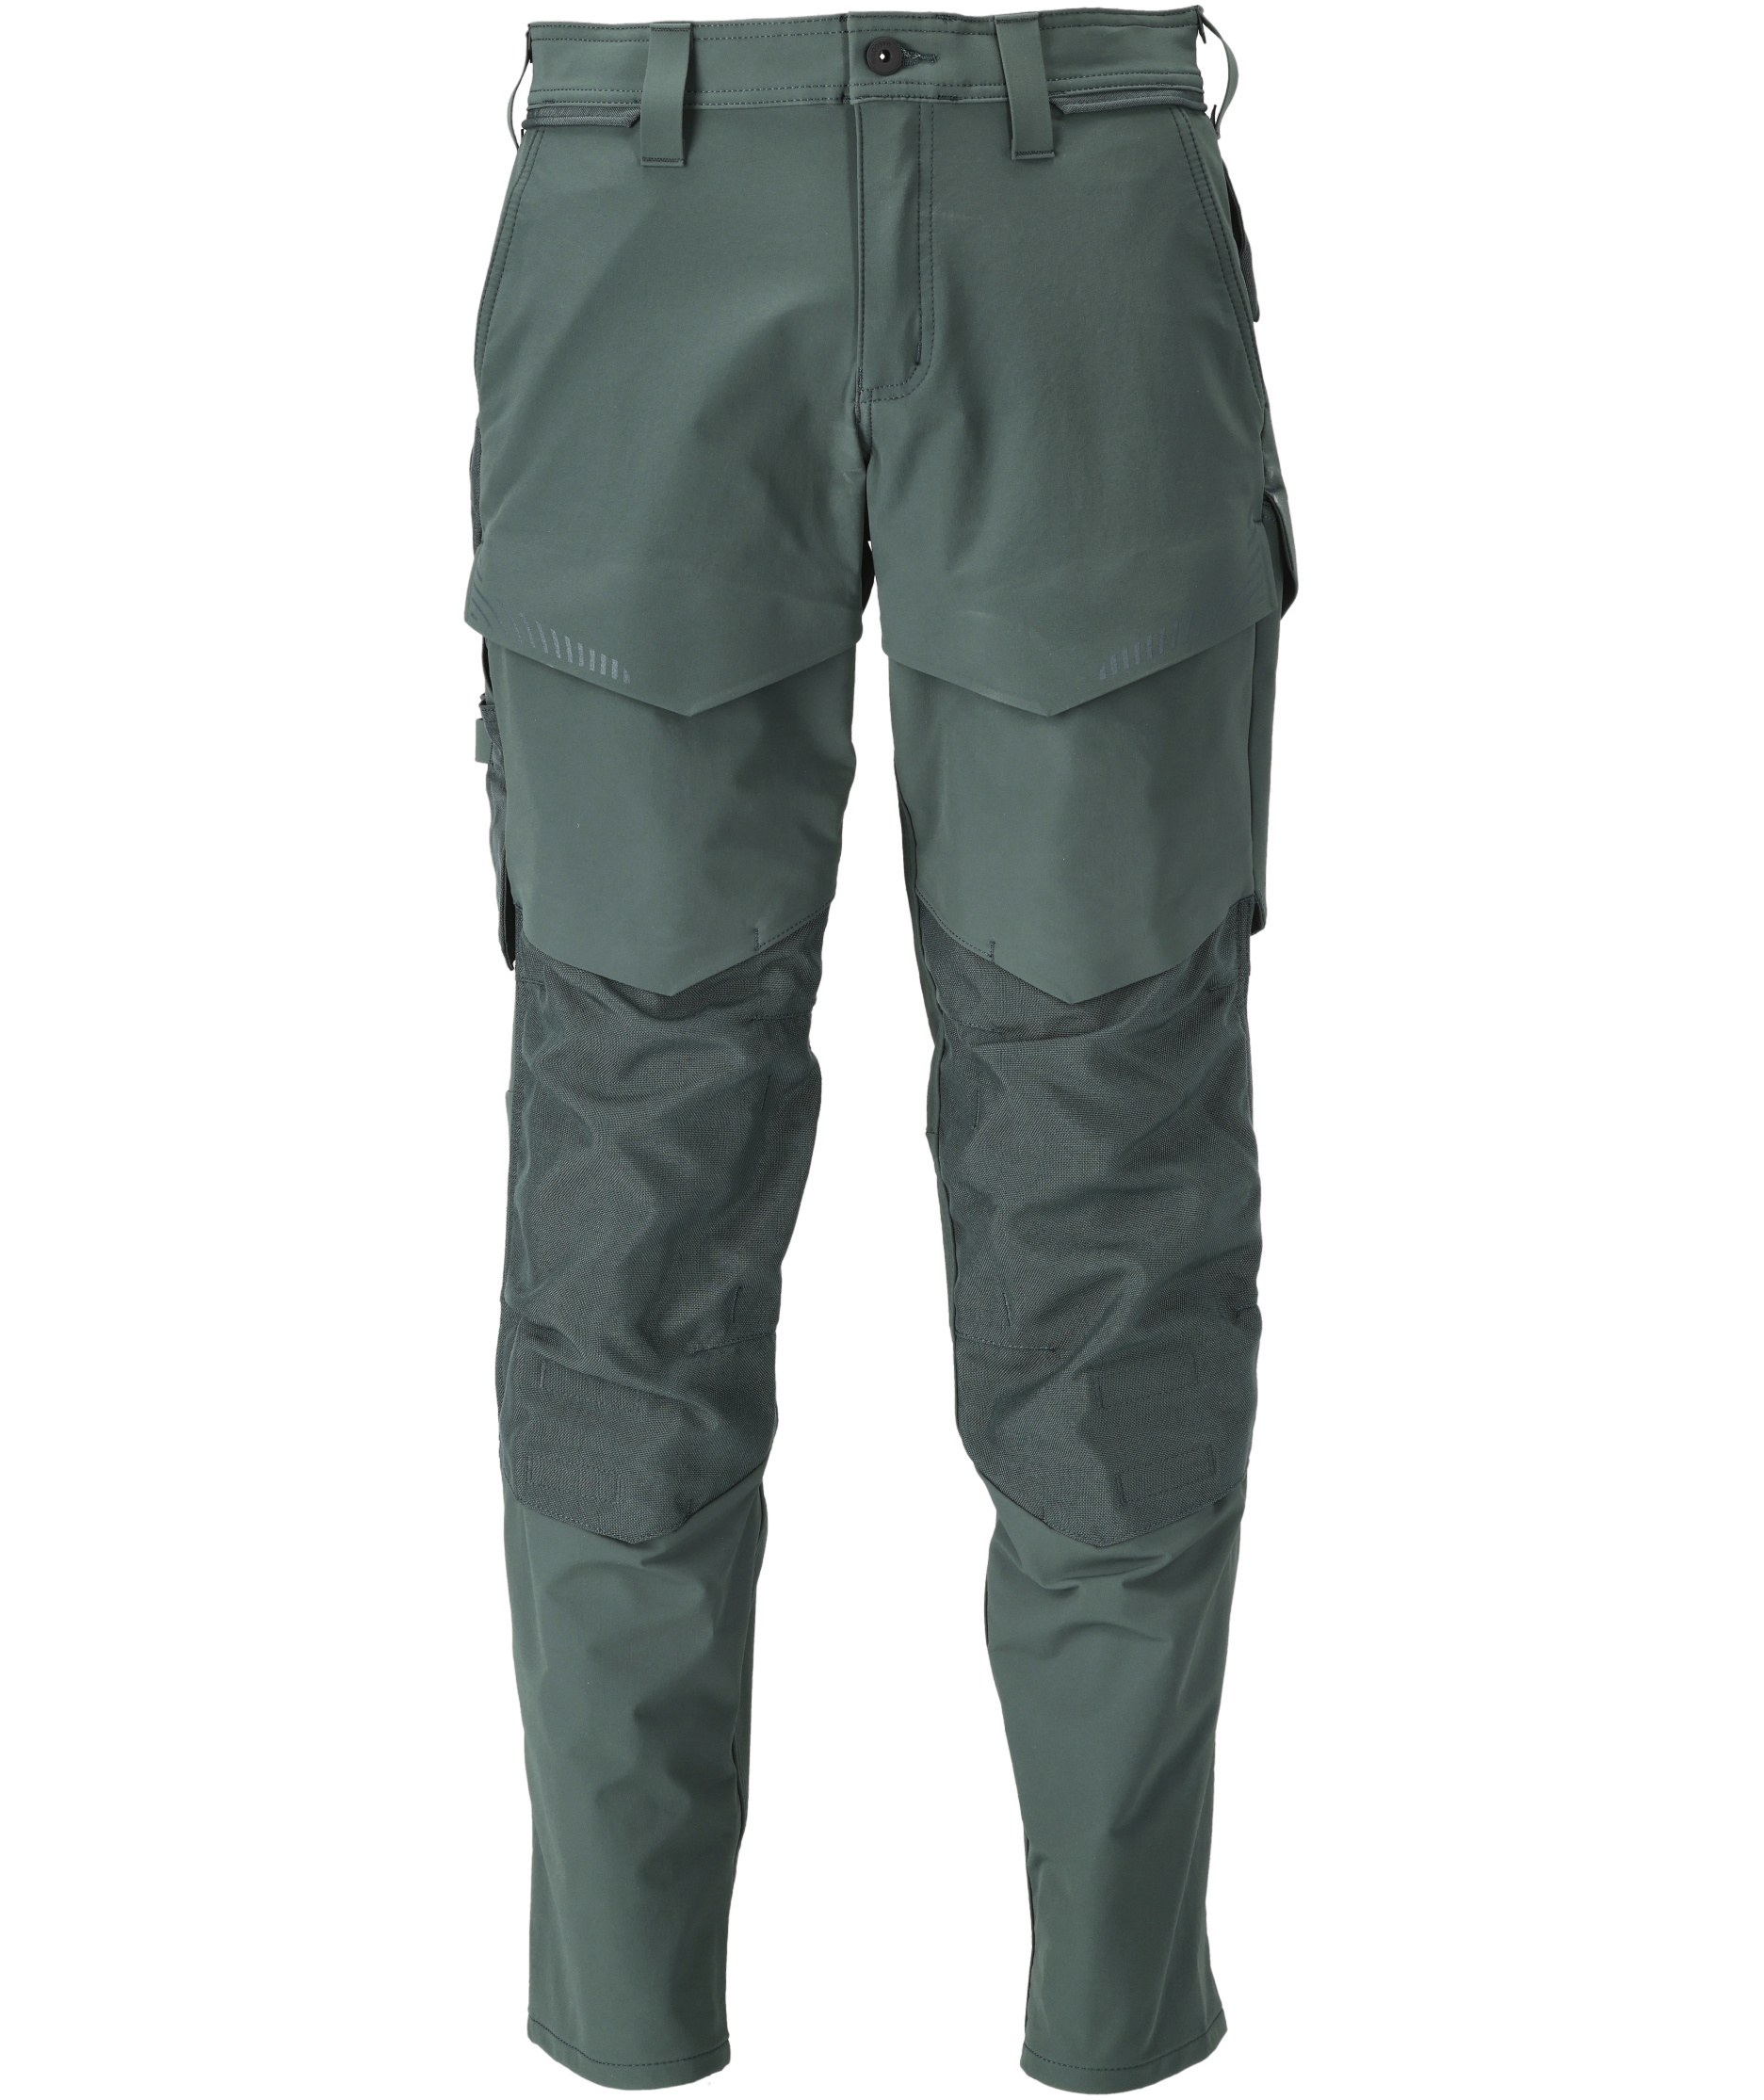 Mascot Workwear 13679 Arosa Multisafe Trousers With Kneepad Pockets -  Clothing from MI Supplies Limited UK